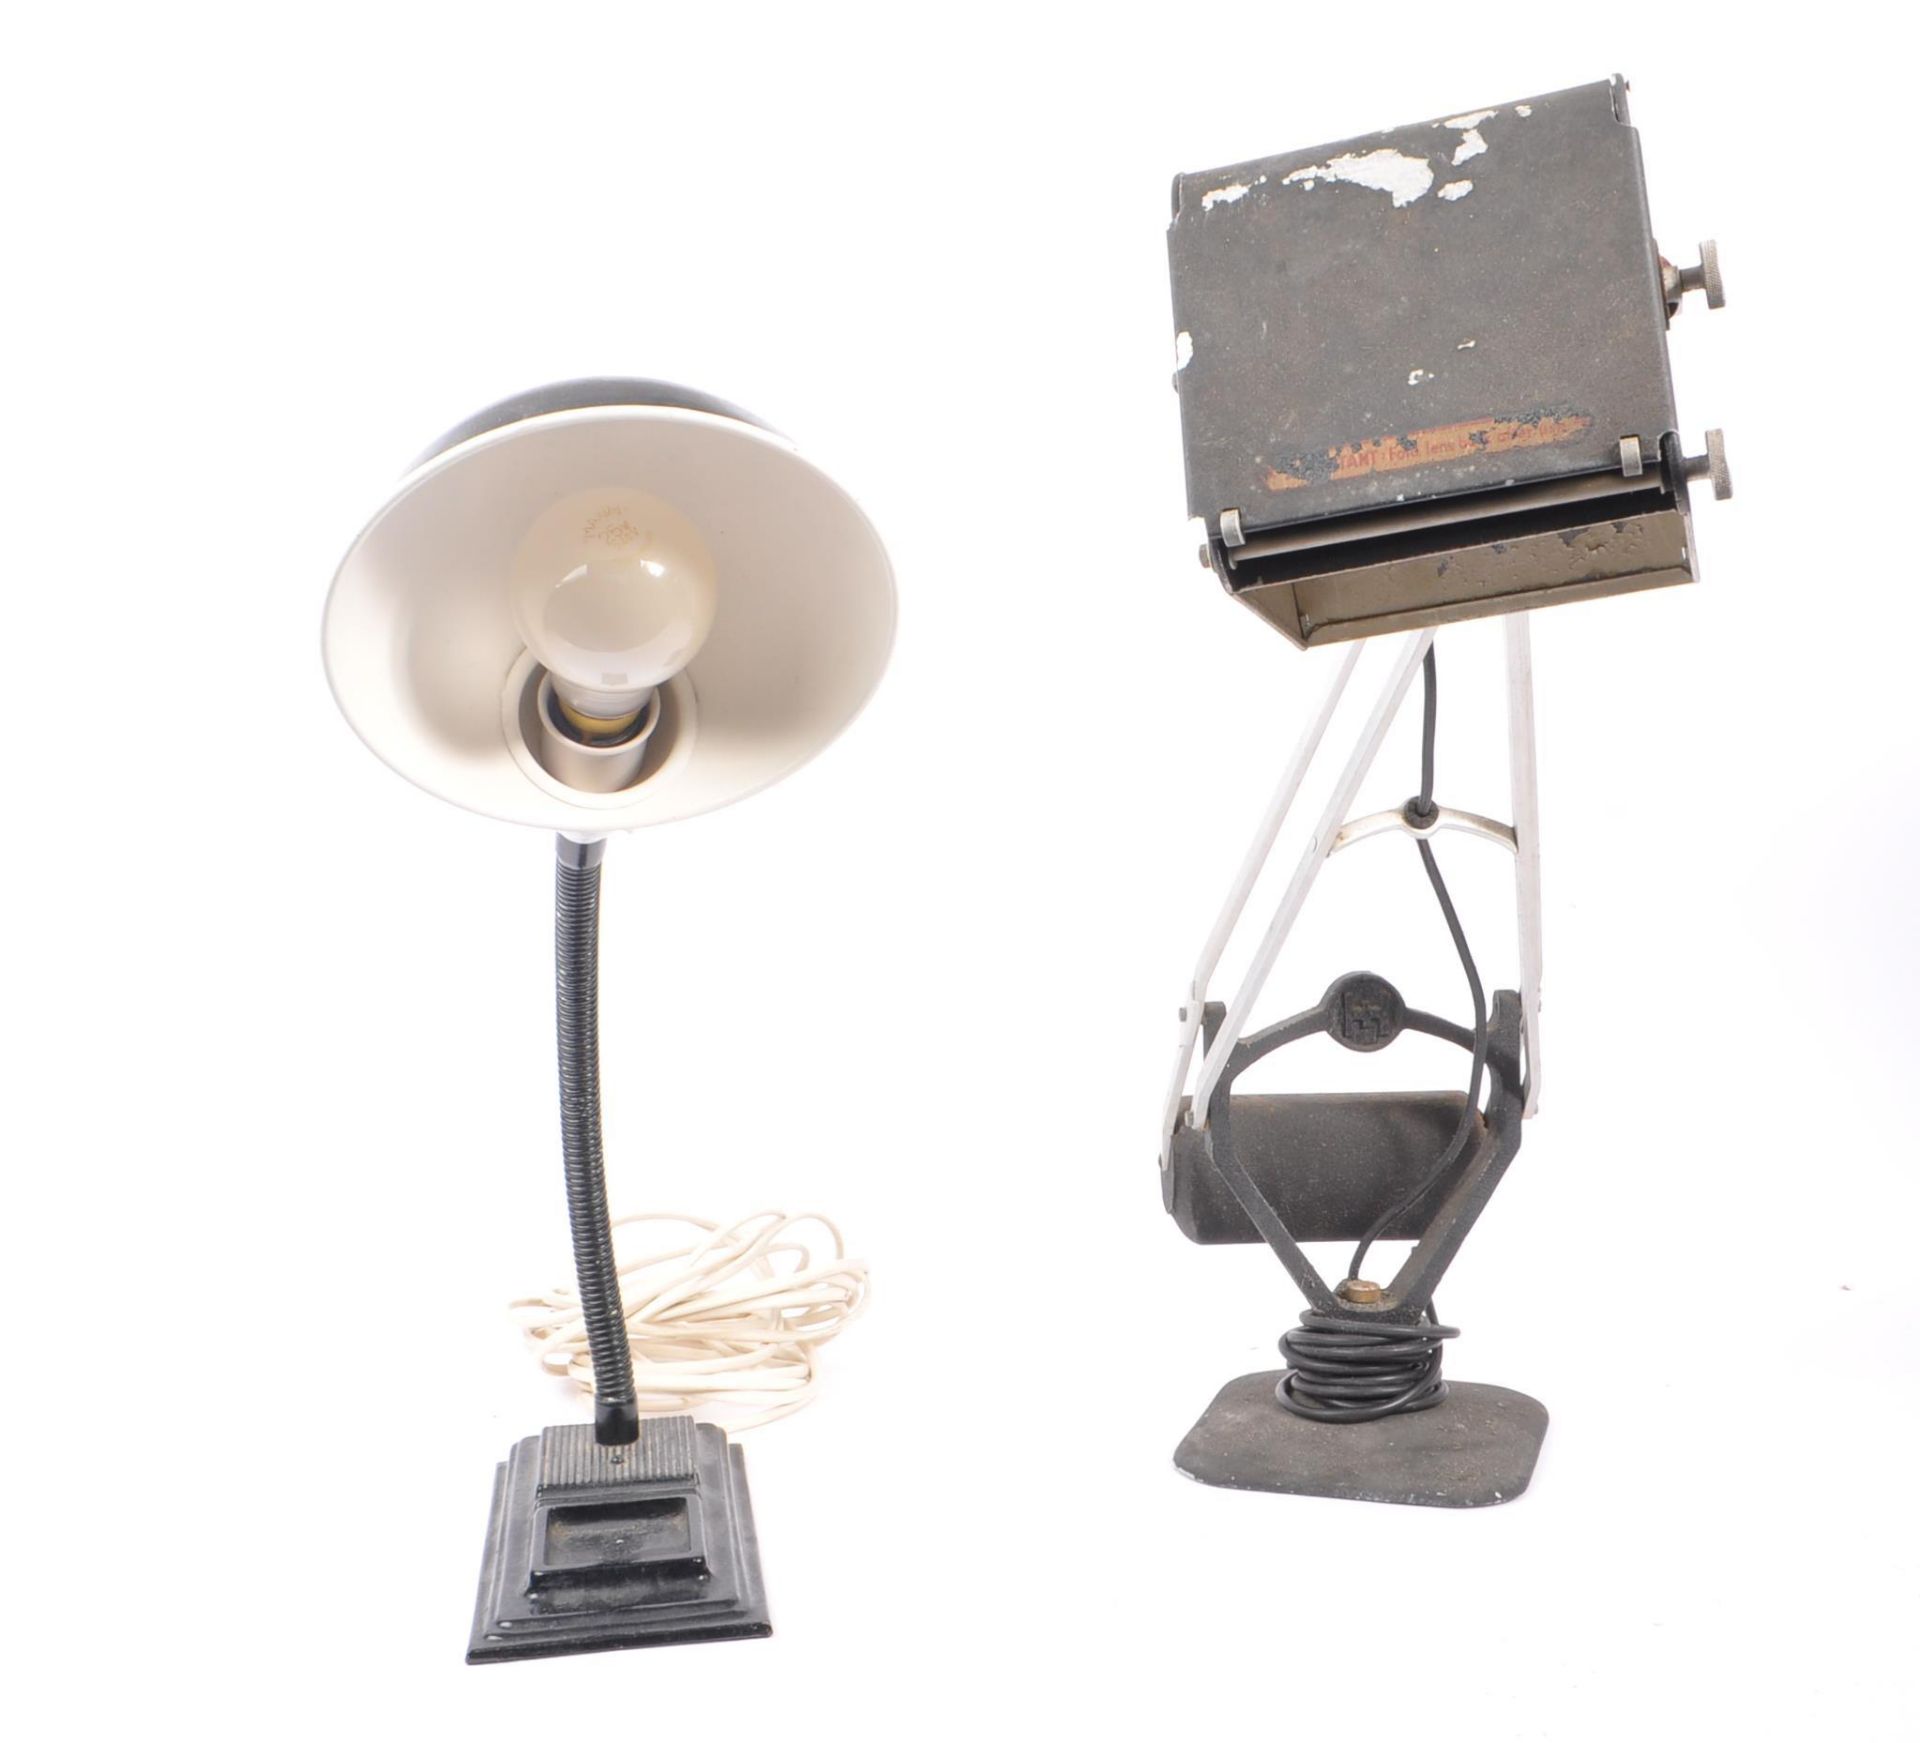 TWO 20TH CENTURY INDUSTRIAL MACHINISTS FACTORY DESK LAMPS - Image 4 of 7